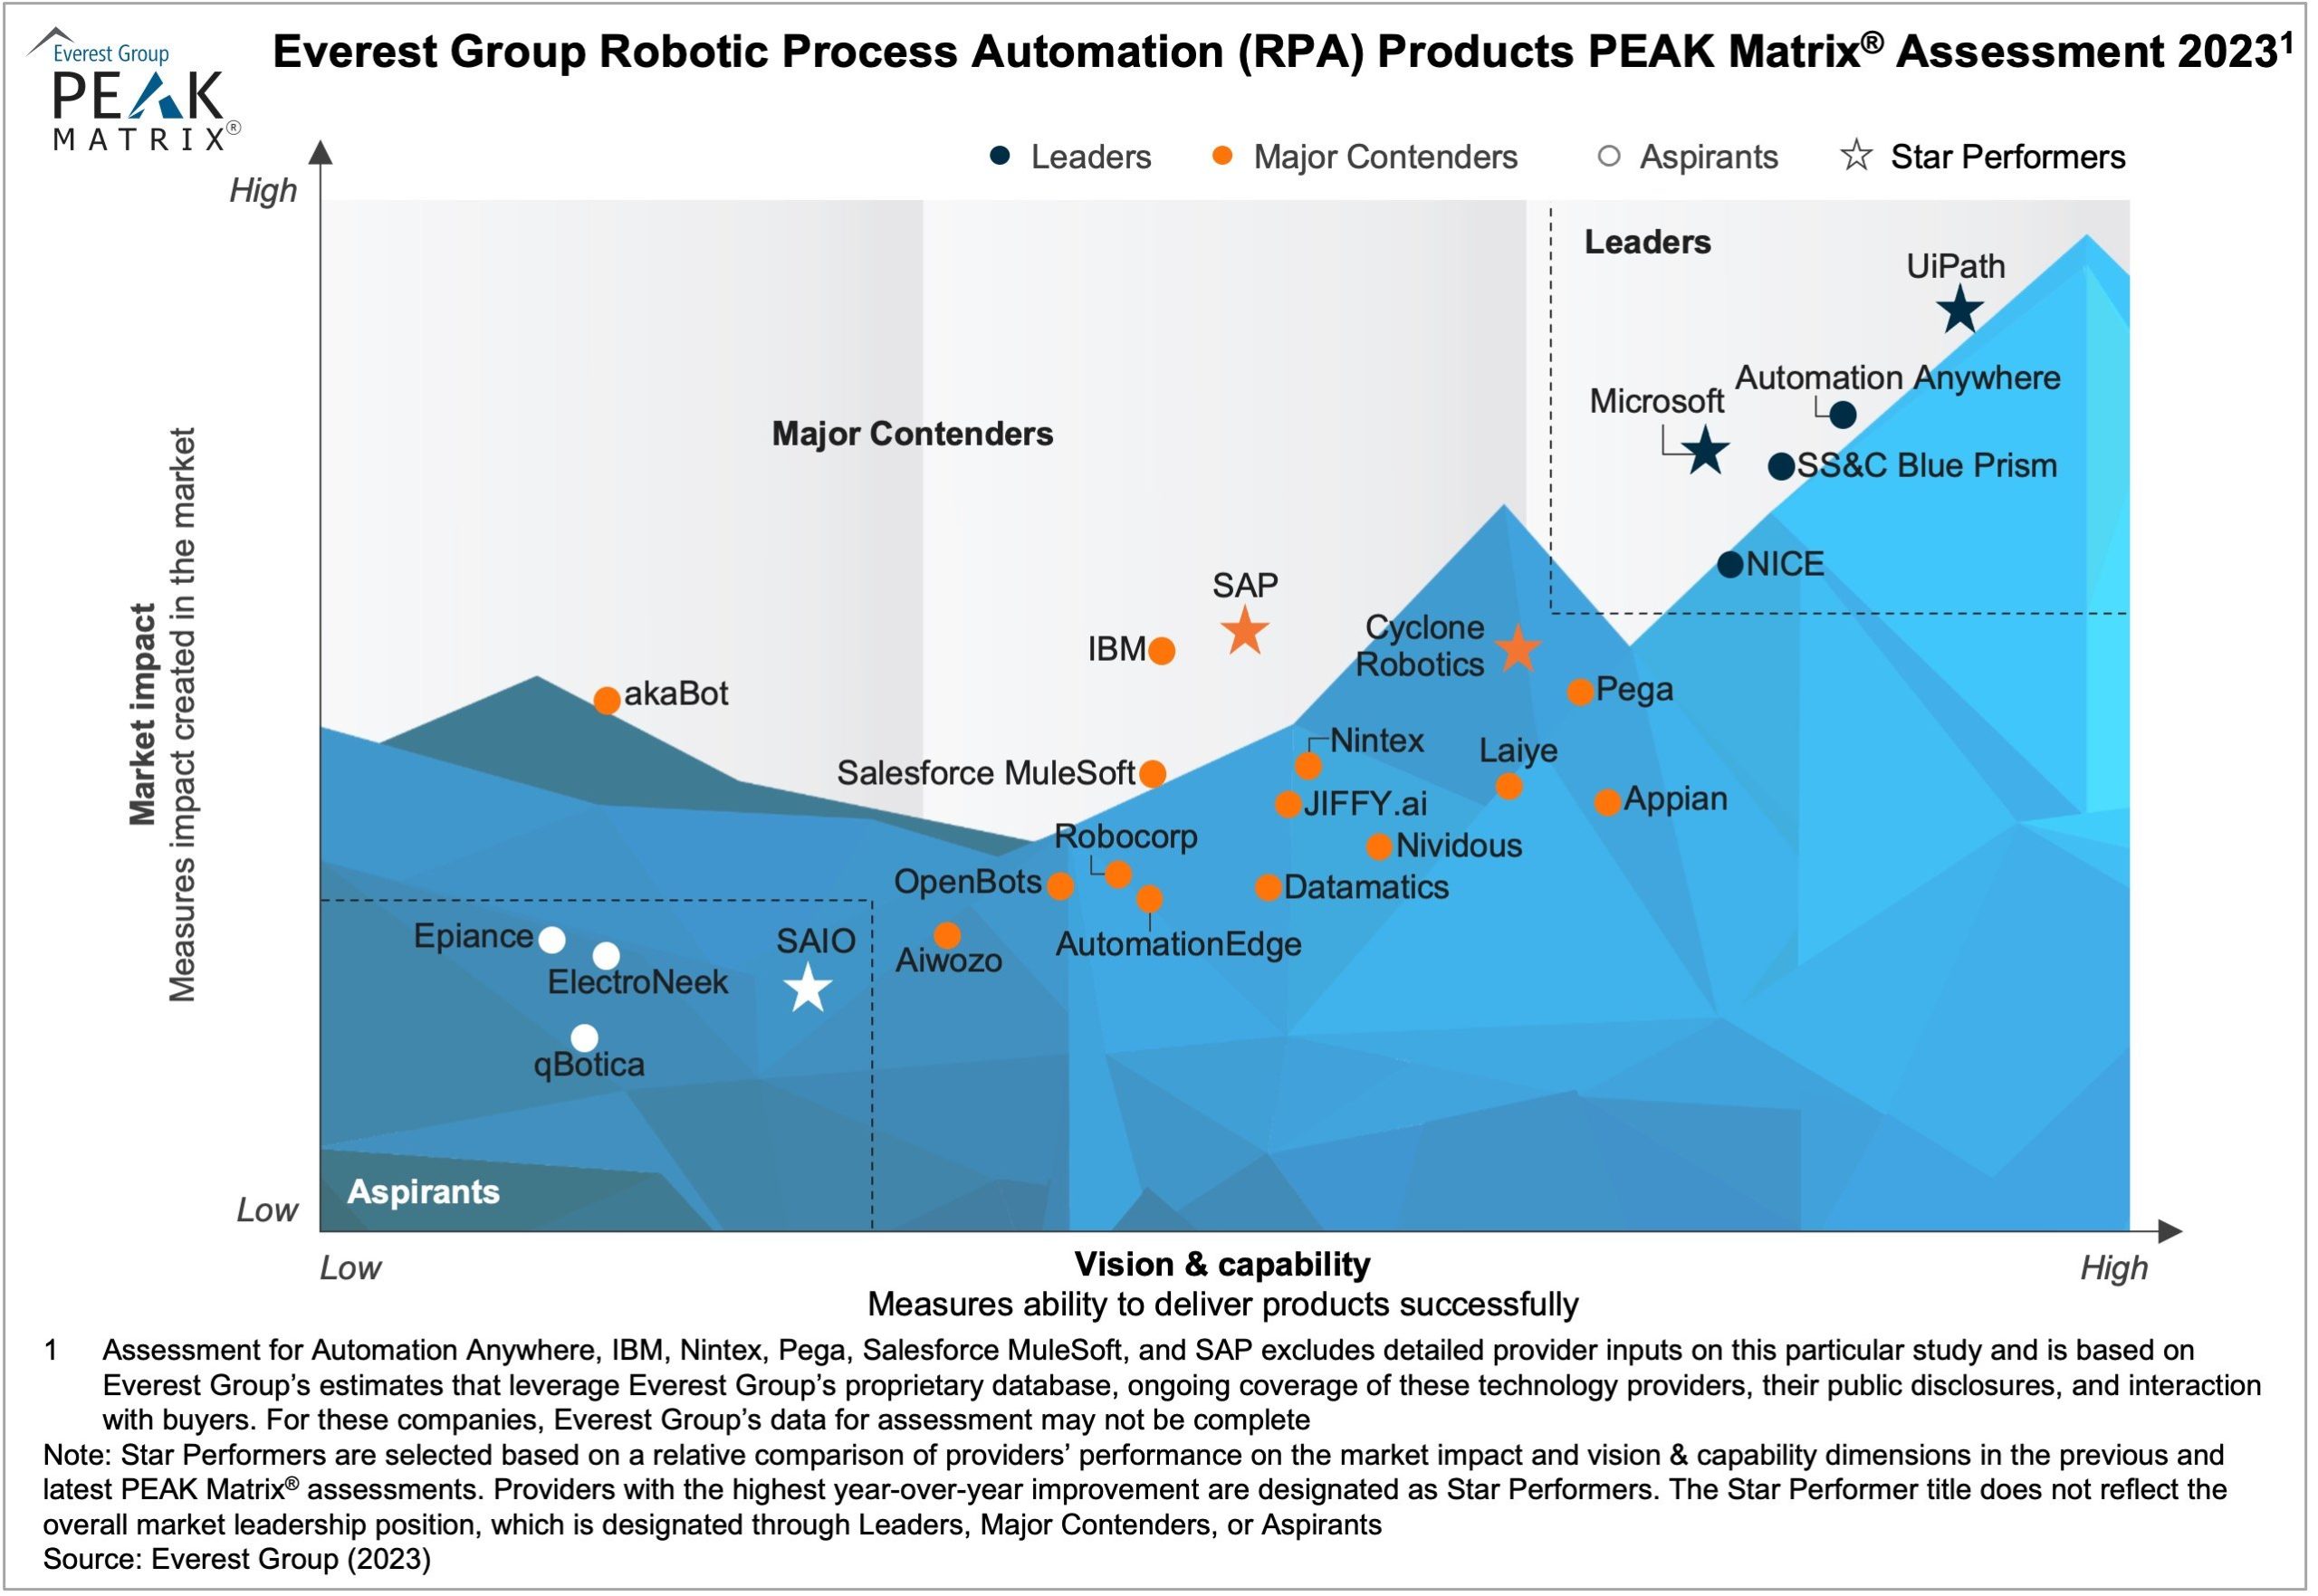 Robotic Process Automation (RPA) Solution (akaBot) is the first “Make in Viet Nam” product named as Major Contender in Everest Group’s PEAK Matrix